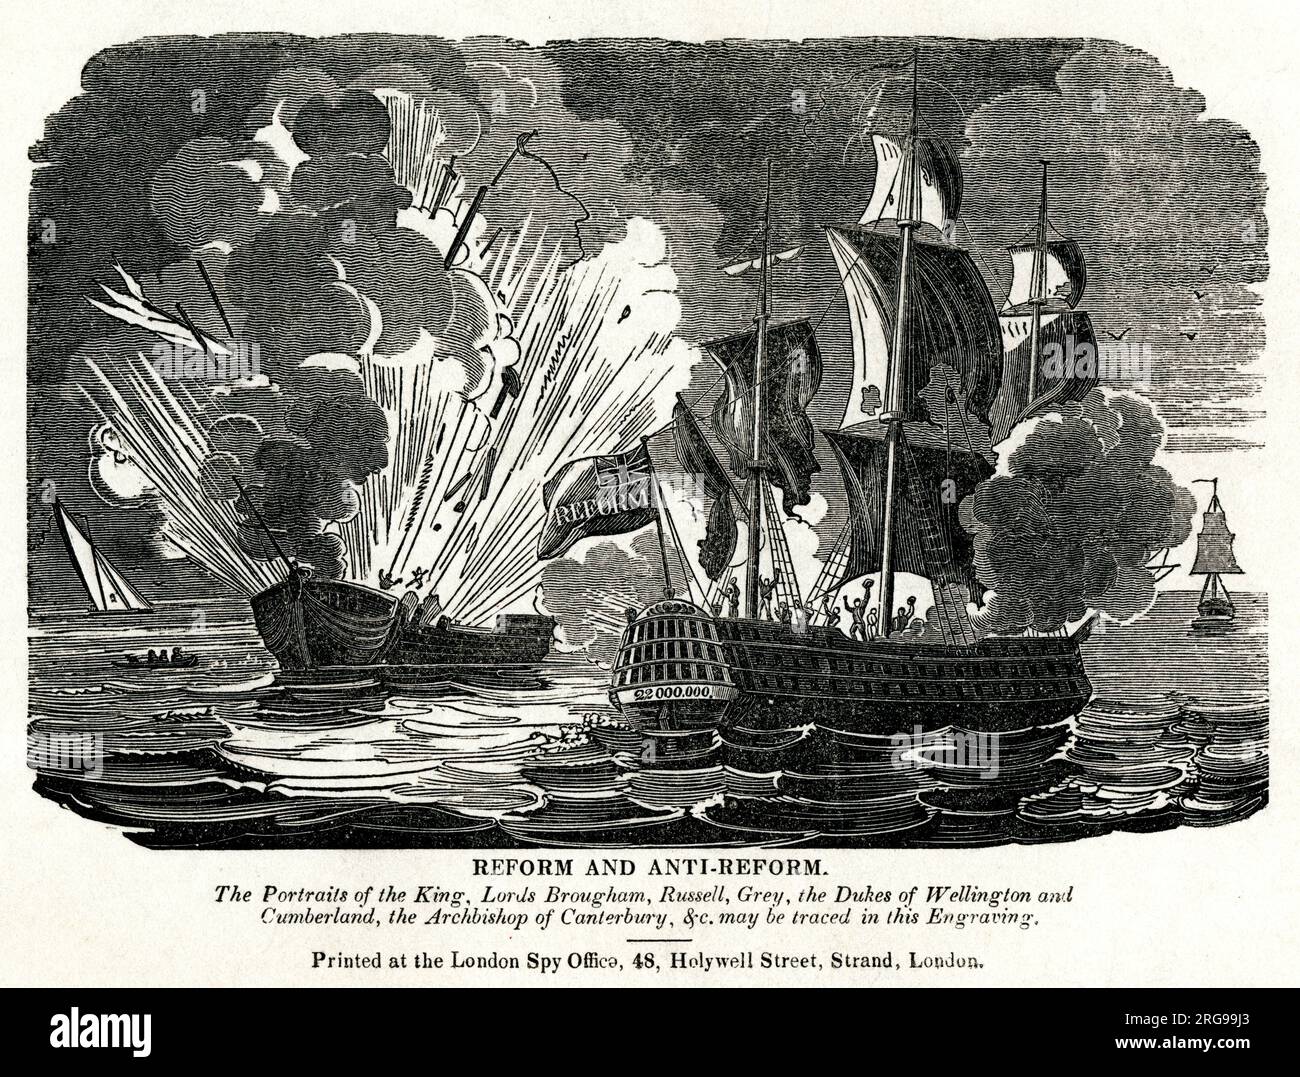 Reform Bill - Reform and Anti-Reform - depiction of a naval battle between two ships, with the Reform ship winning. 'The Portraits of the King, Lords Brougham, Russell, Grey, the Dukes of Wellington and Cumberland, the Archbishop of Canterbury, &c. may be traced in this Engraving.' Stock Photo